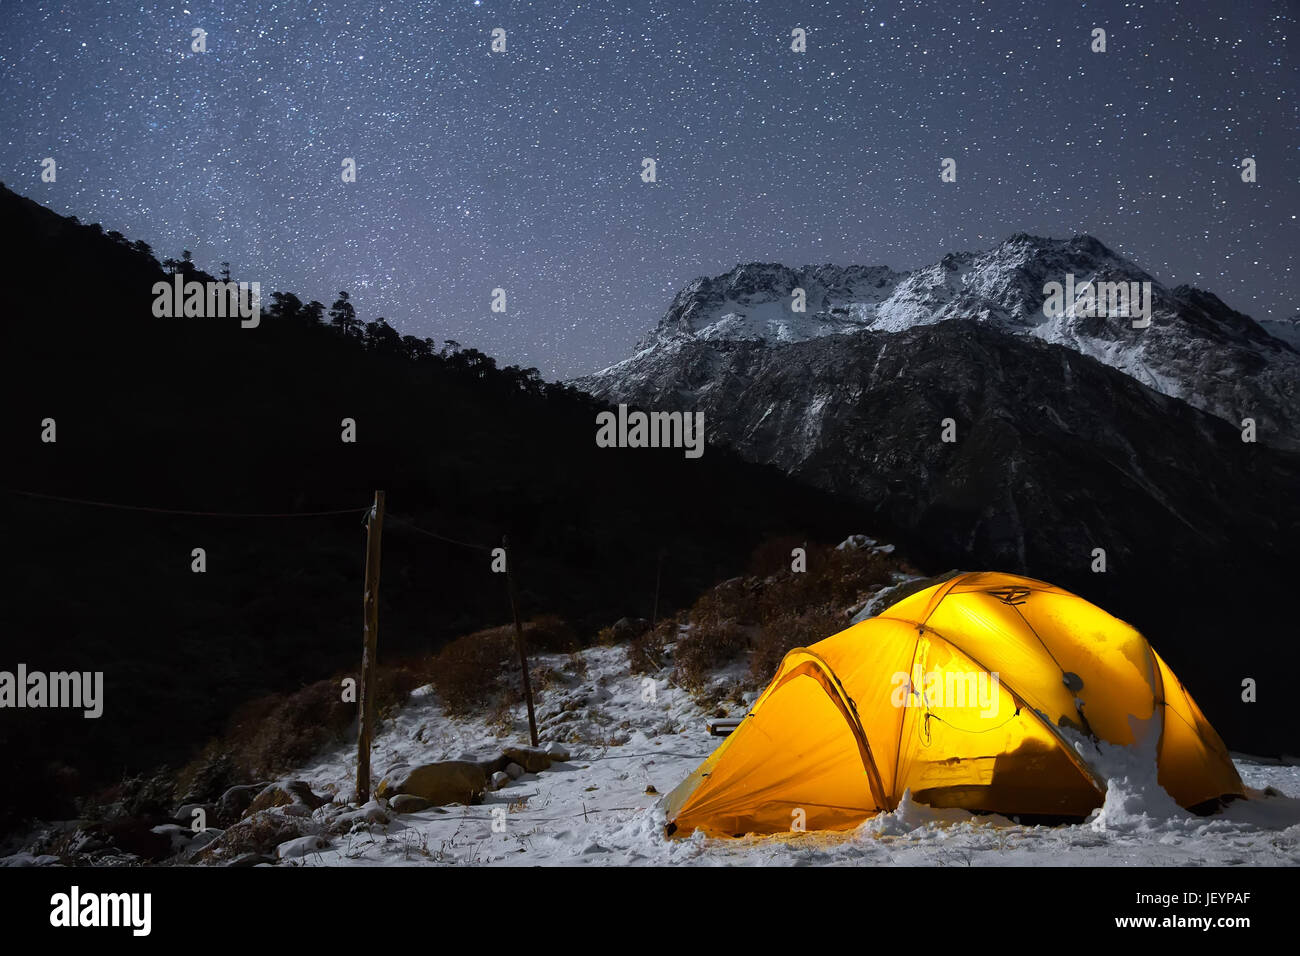 Tent high in the mountains with the stars above. Captured in Nepal, Himalayas. Stock Photo